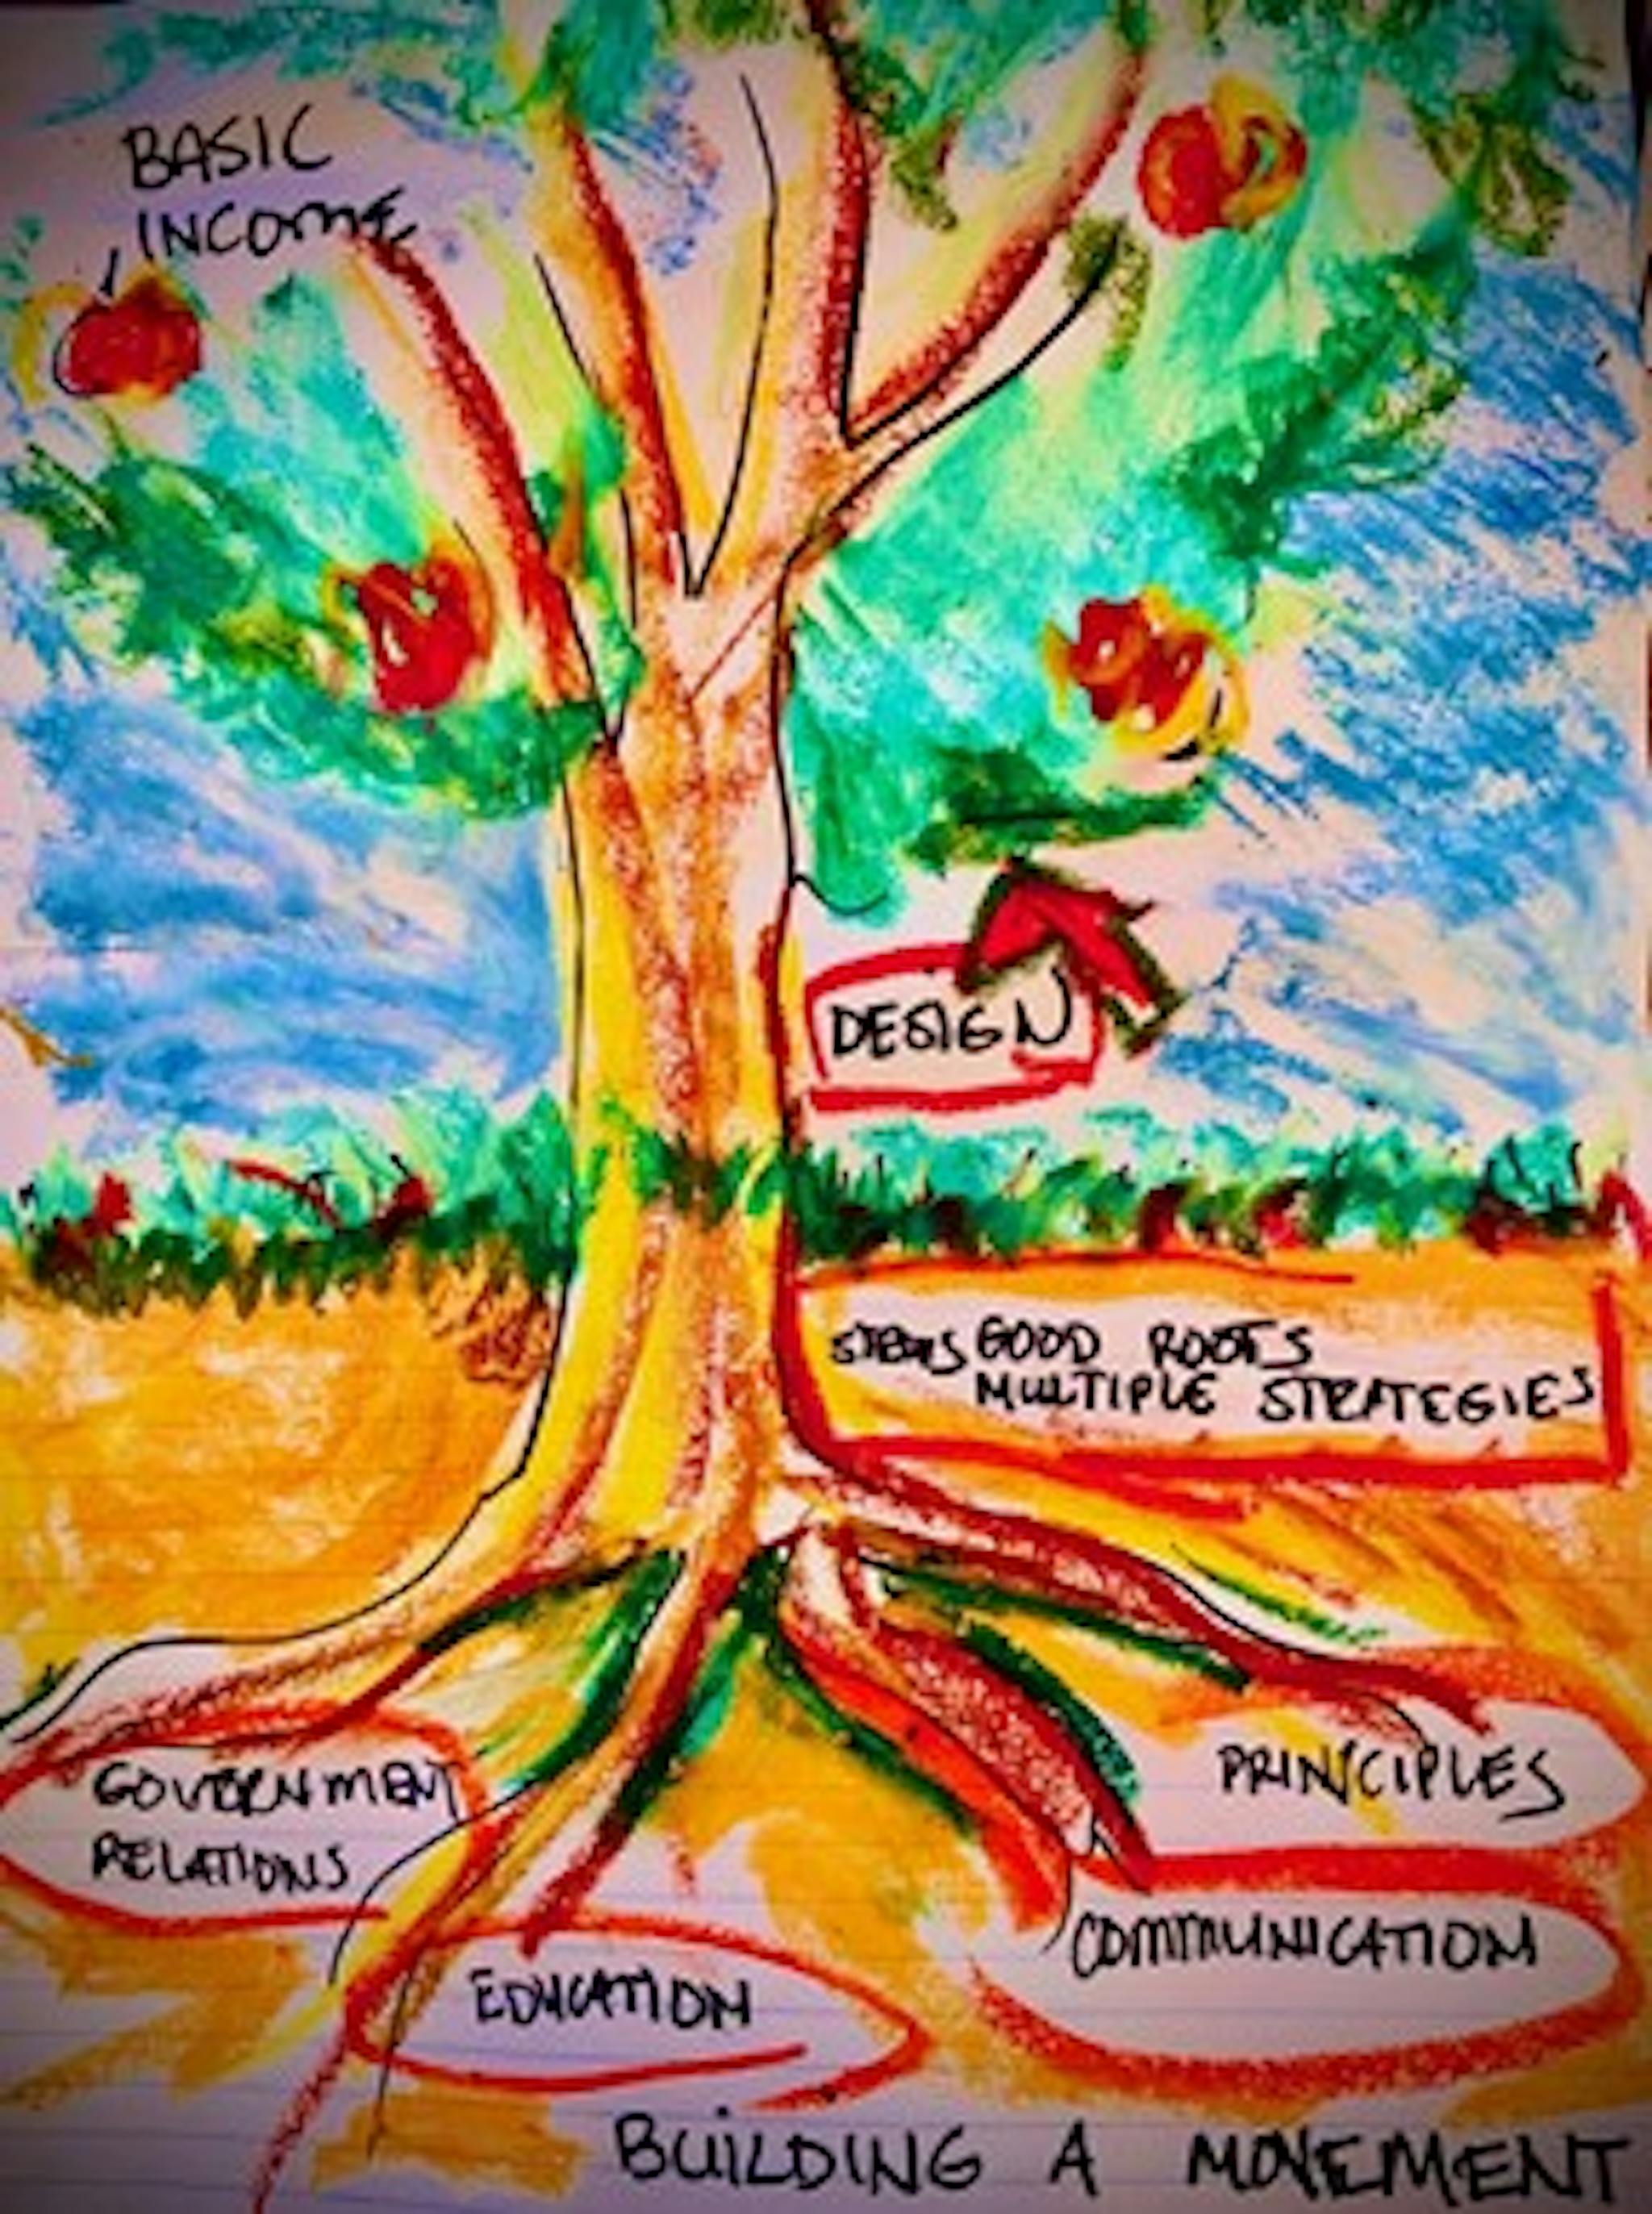 Illustration of a tree with roots labeled with concepts in the blog and basic income labeled as the fruit.